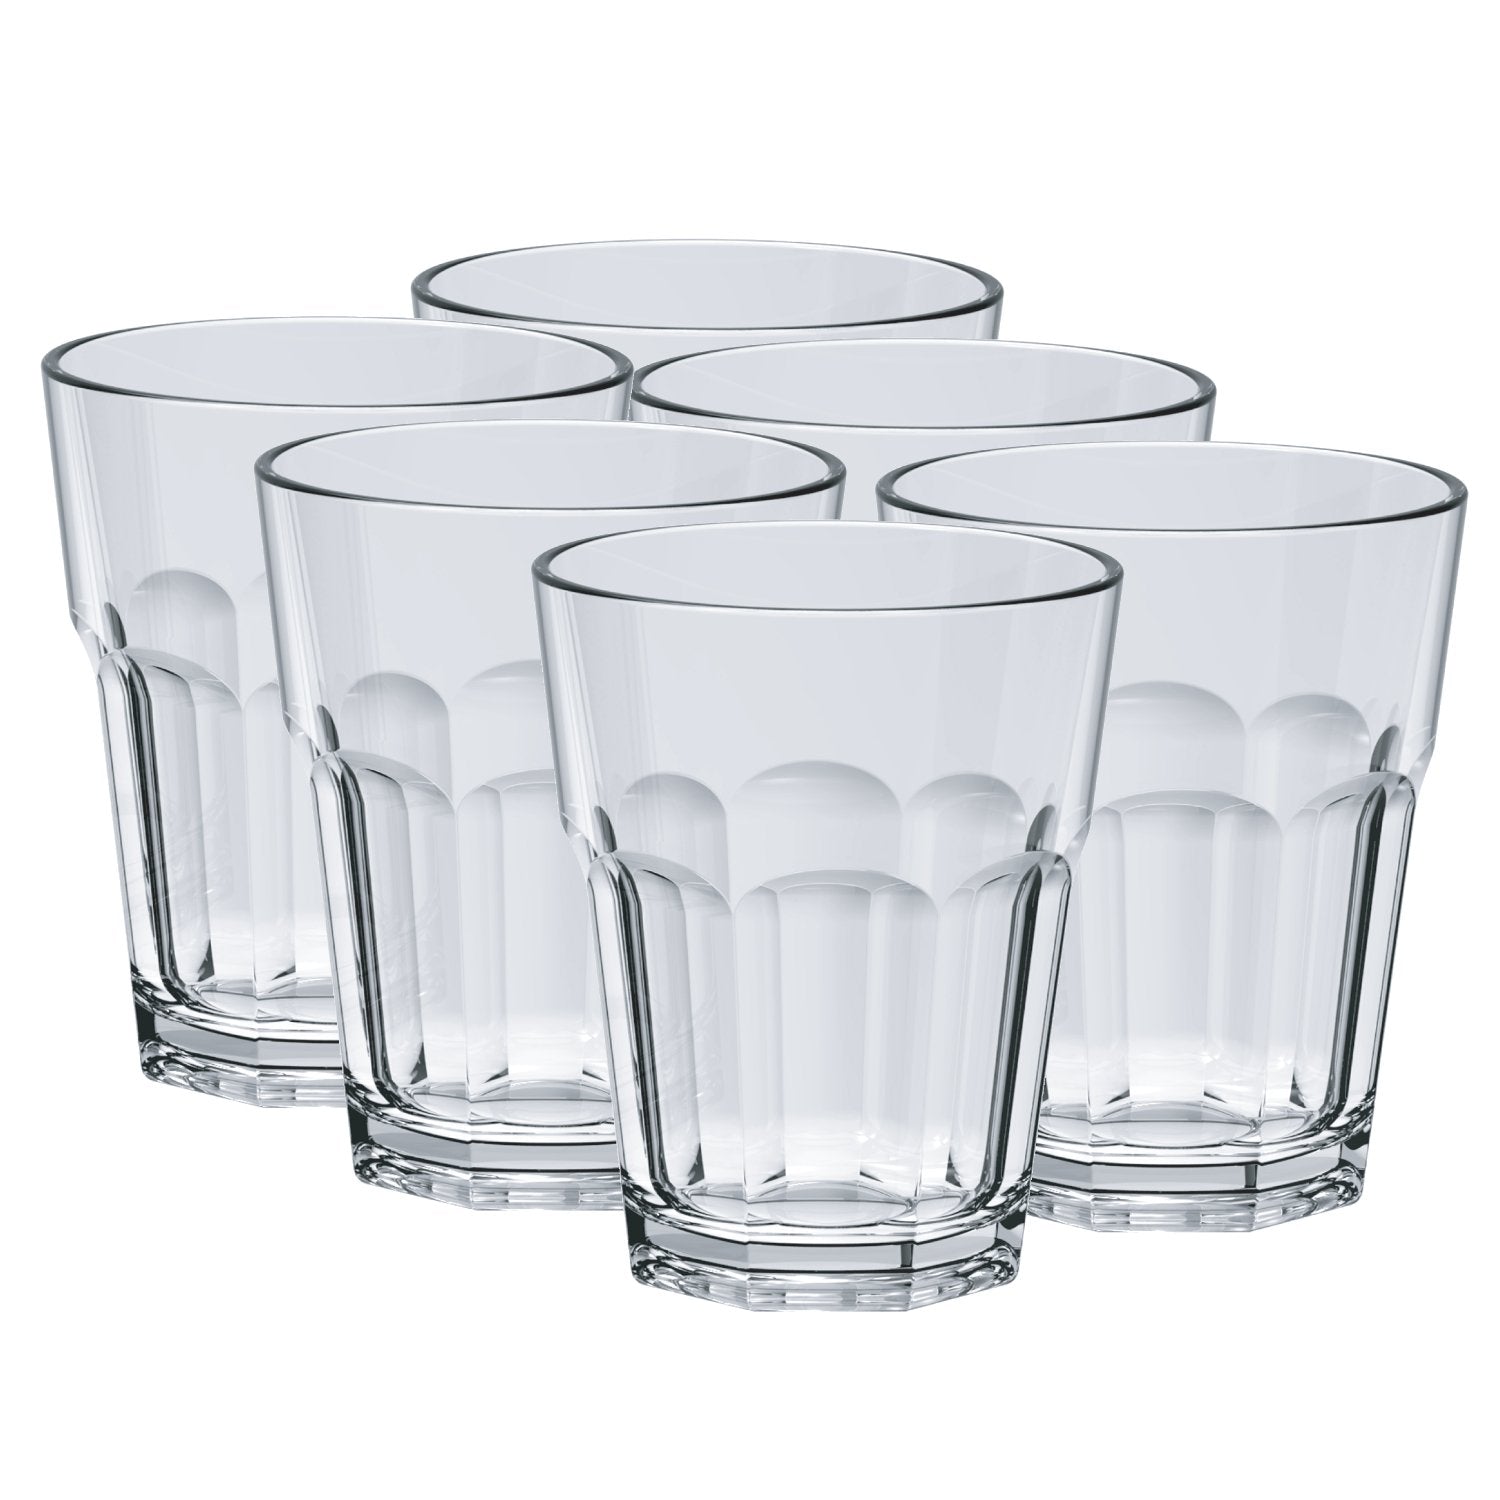 WEXINHAO Clear Drinking Glasses - Unbreakable Acrylic Glasses Drinkware 18  oz set of 6 - BPA Free Di…See more WEXINHAO Clear Drinking Glasses 